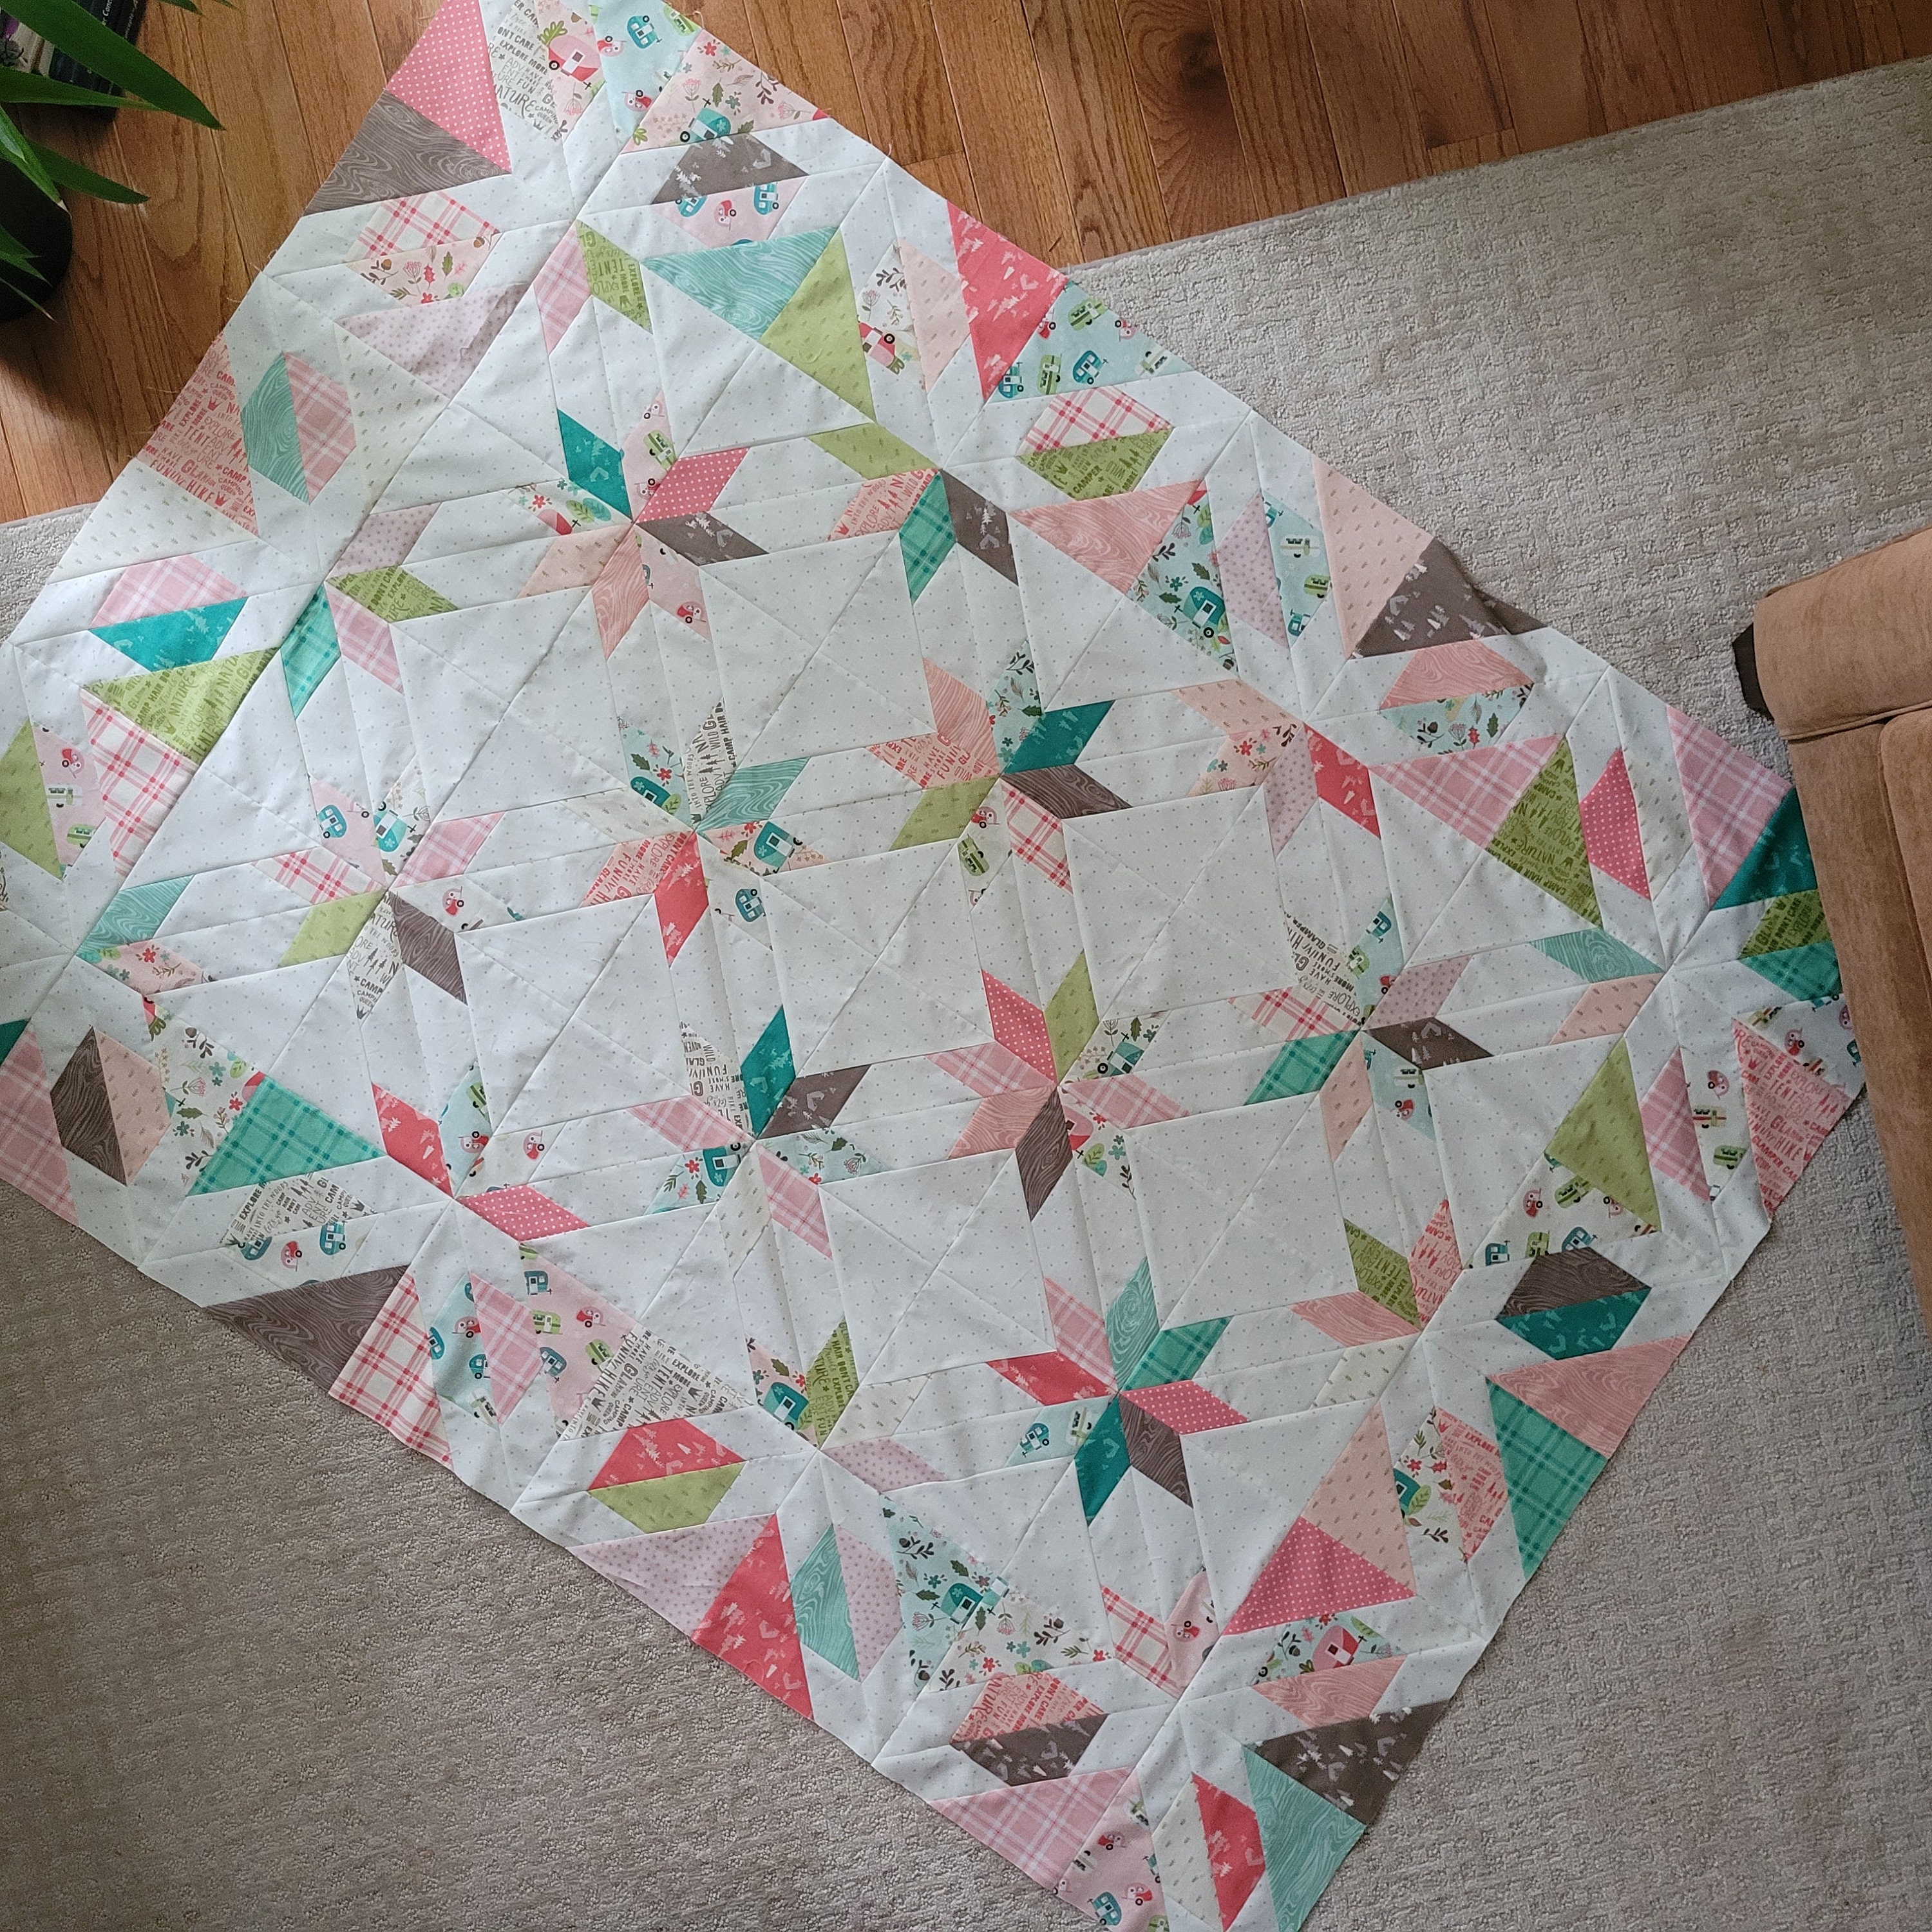 UNFINISHED Quilt Top for Sale Star MSQC - Etsy